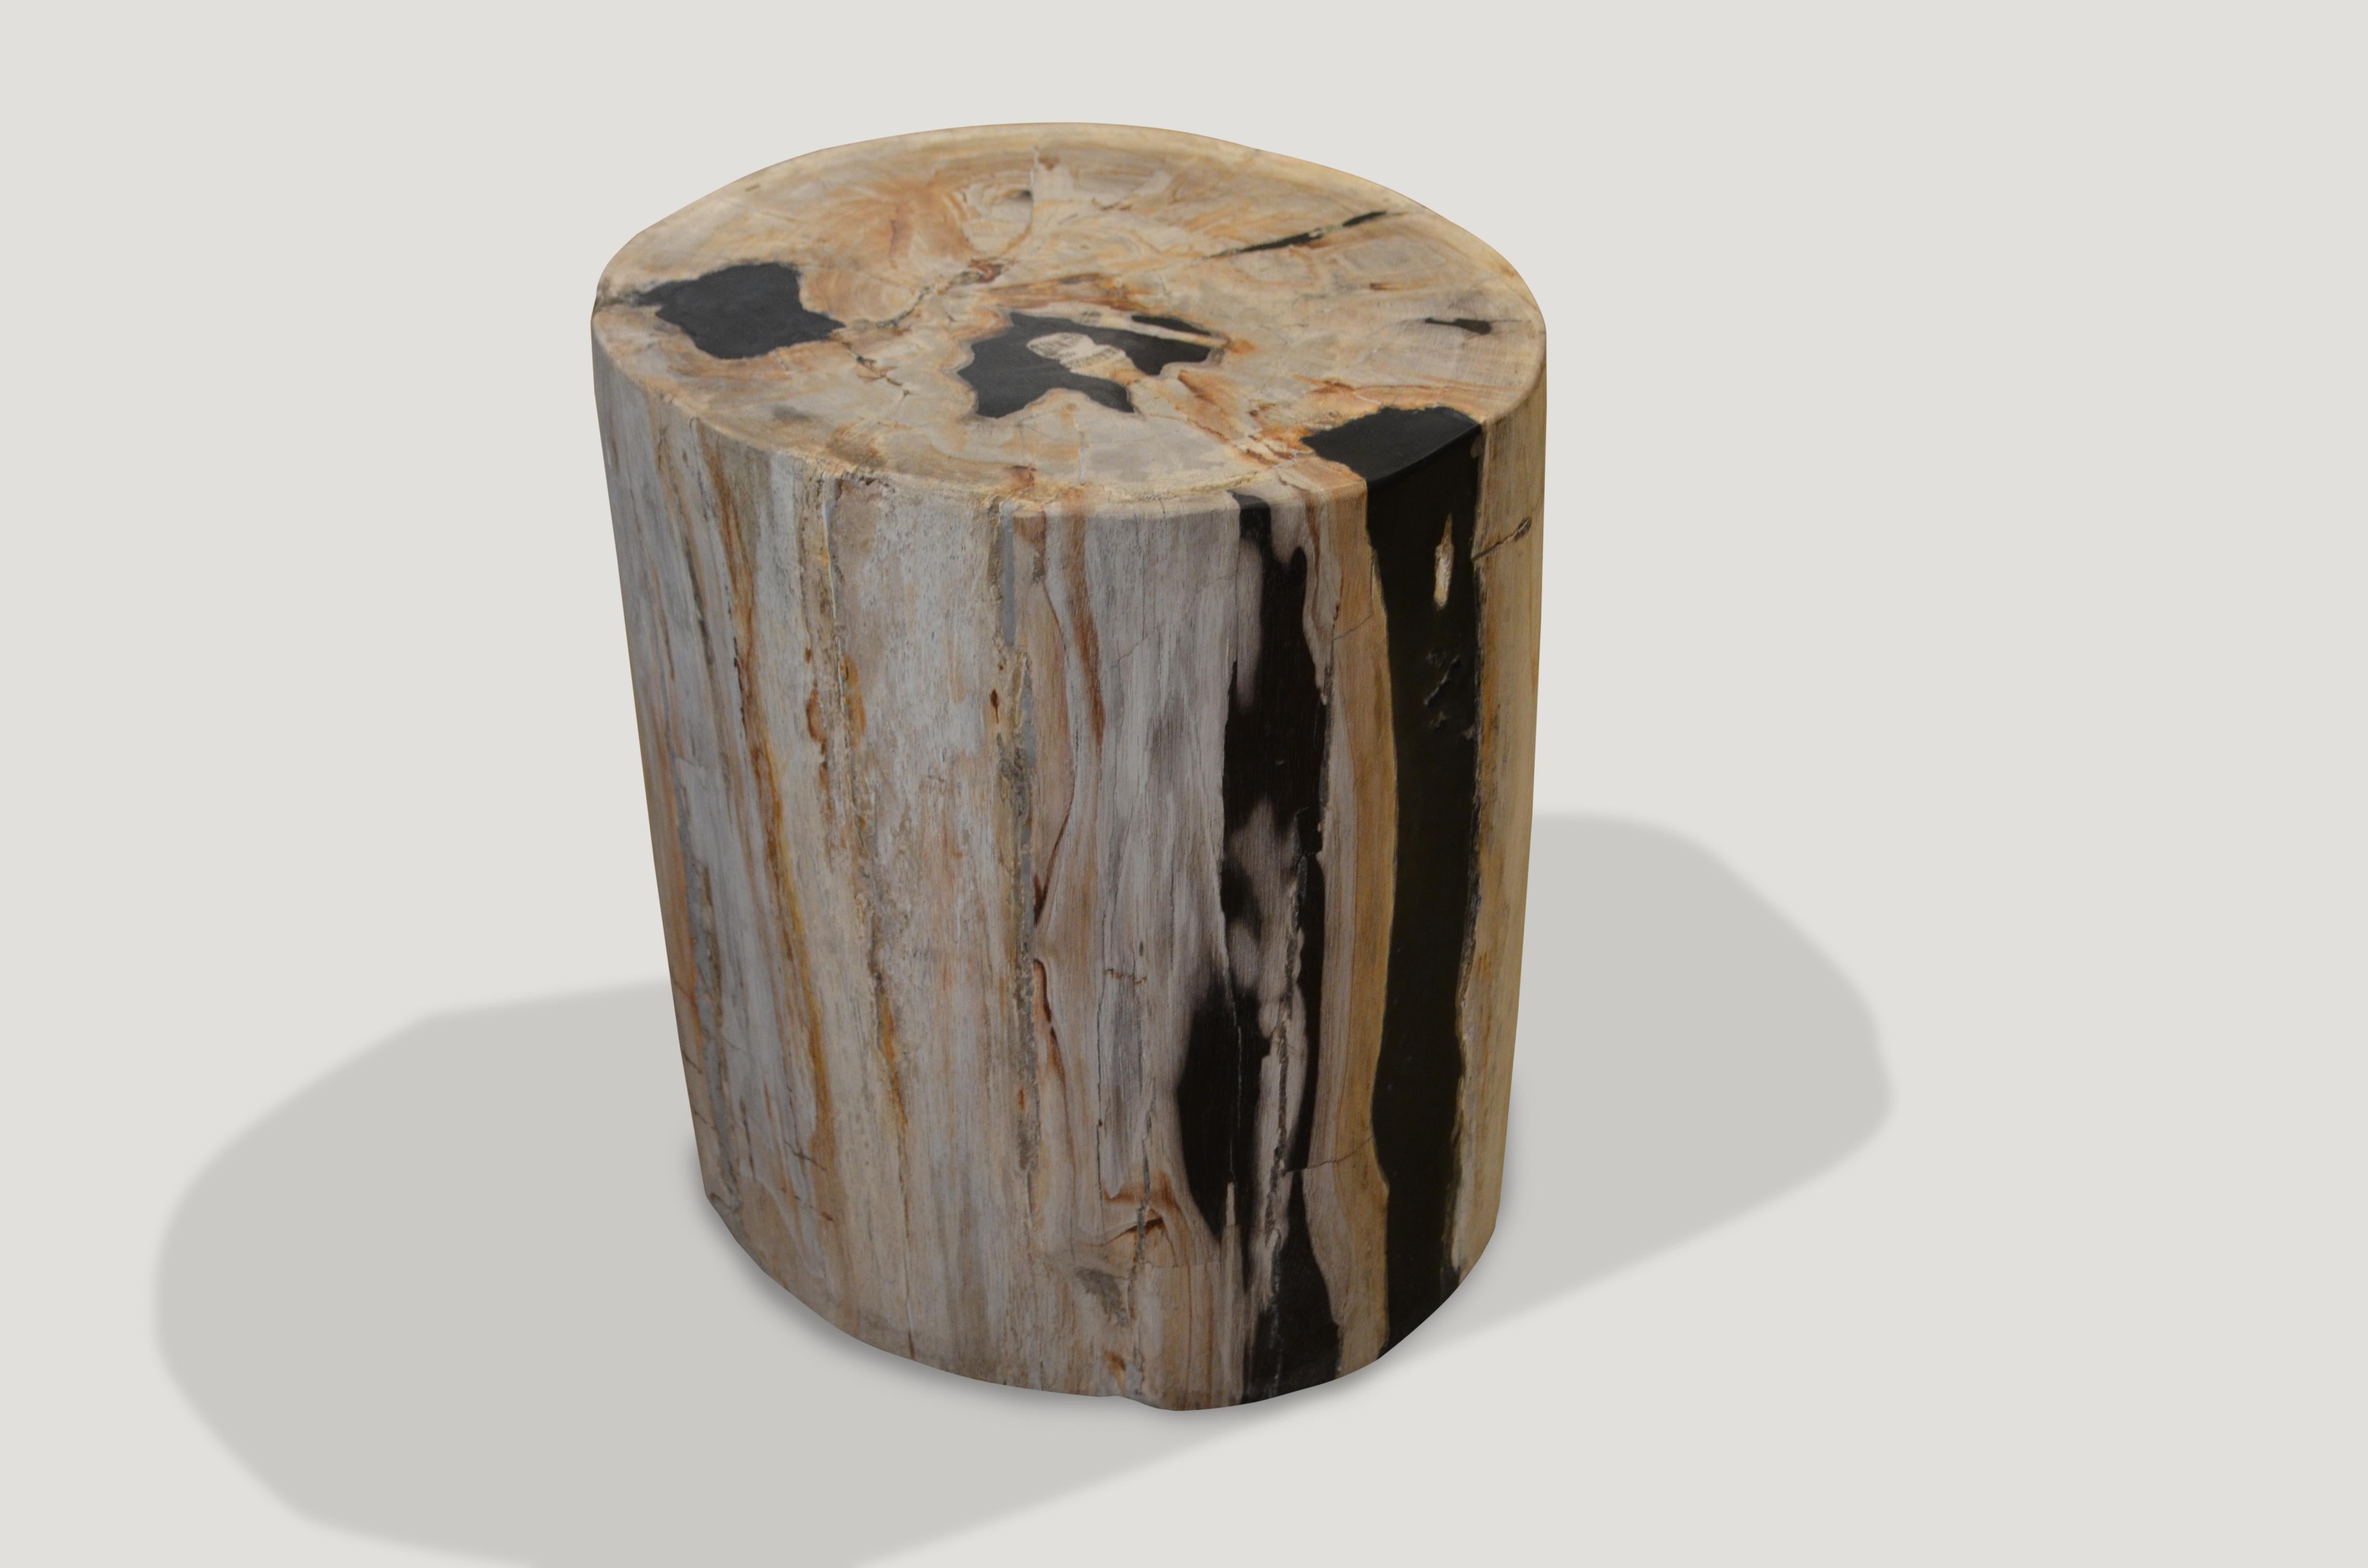 Striking contrasting color tones on this petrified wood side table. 

We source the highest quality petrified wood available. Each piece is hand-selected and highly polished with minimal cracks. Petrified wood is extremely versatile – even great